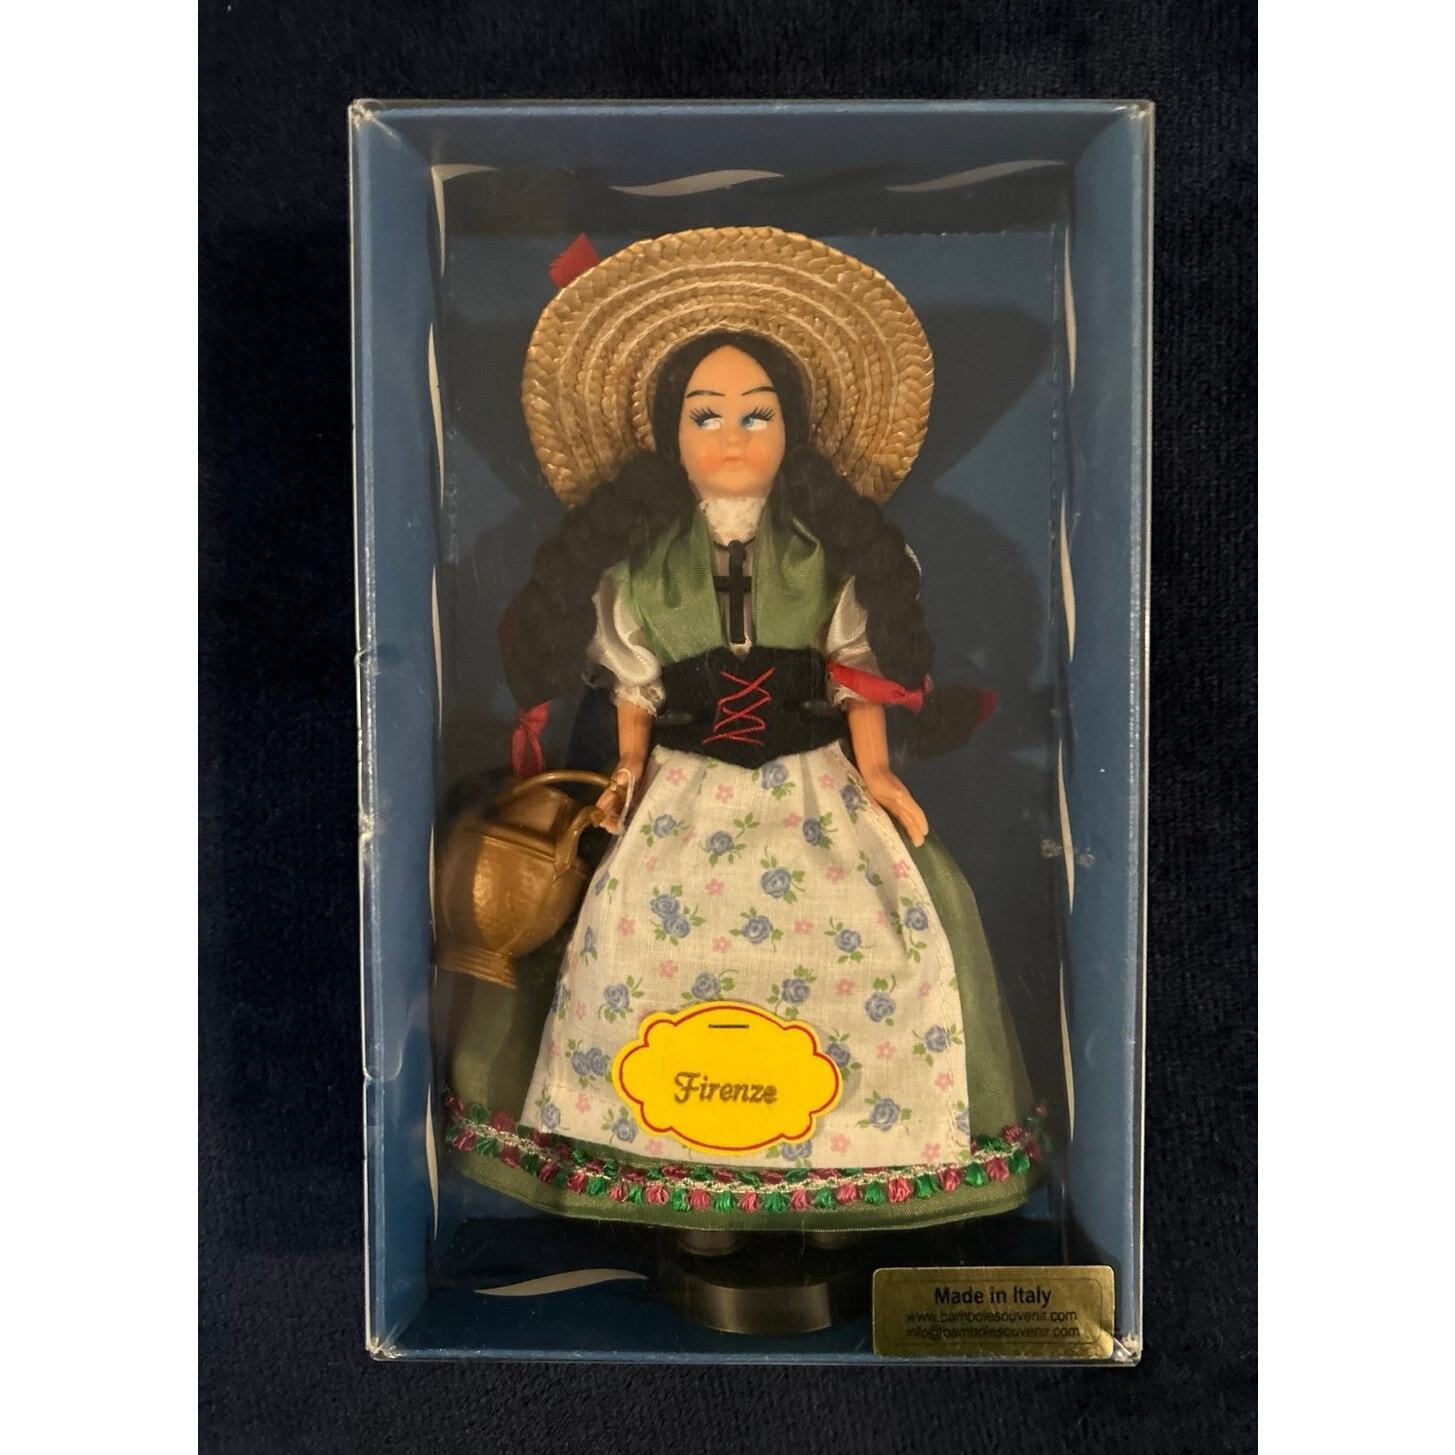 Vintage 1950s Collectible Doll Traditional Folk Costume Firenze Toscano Italy